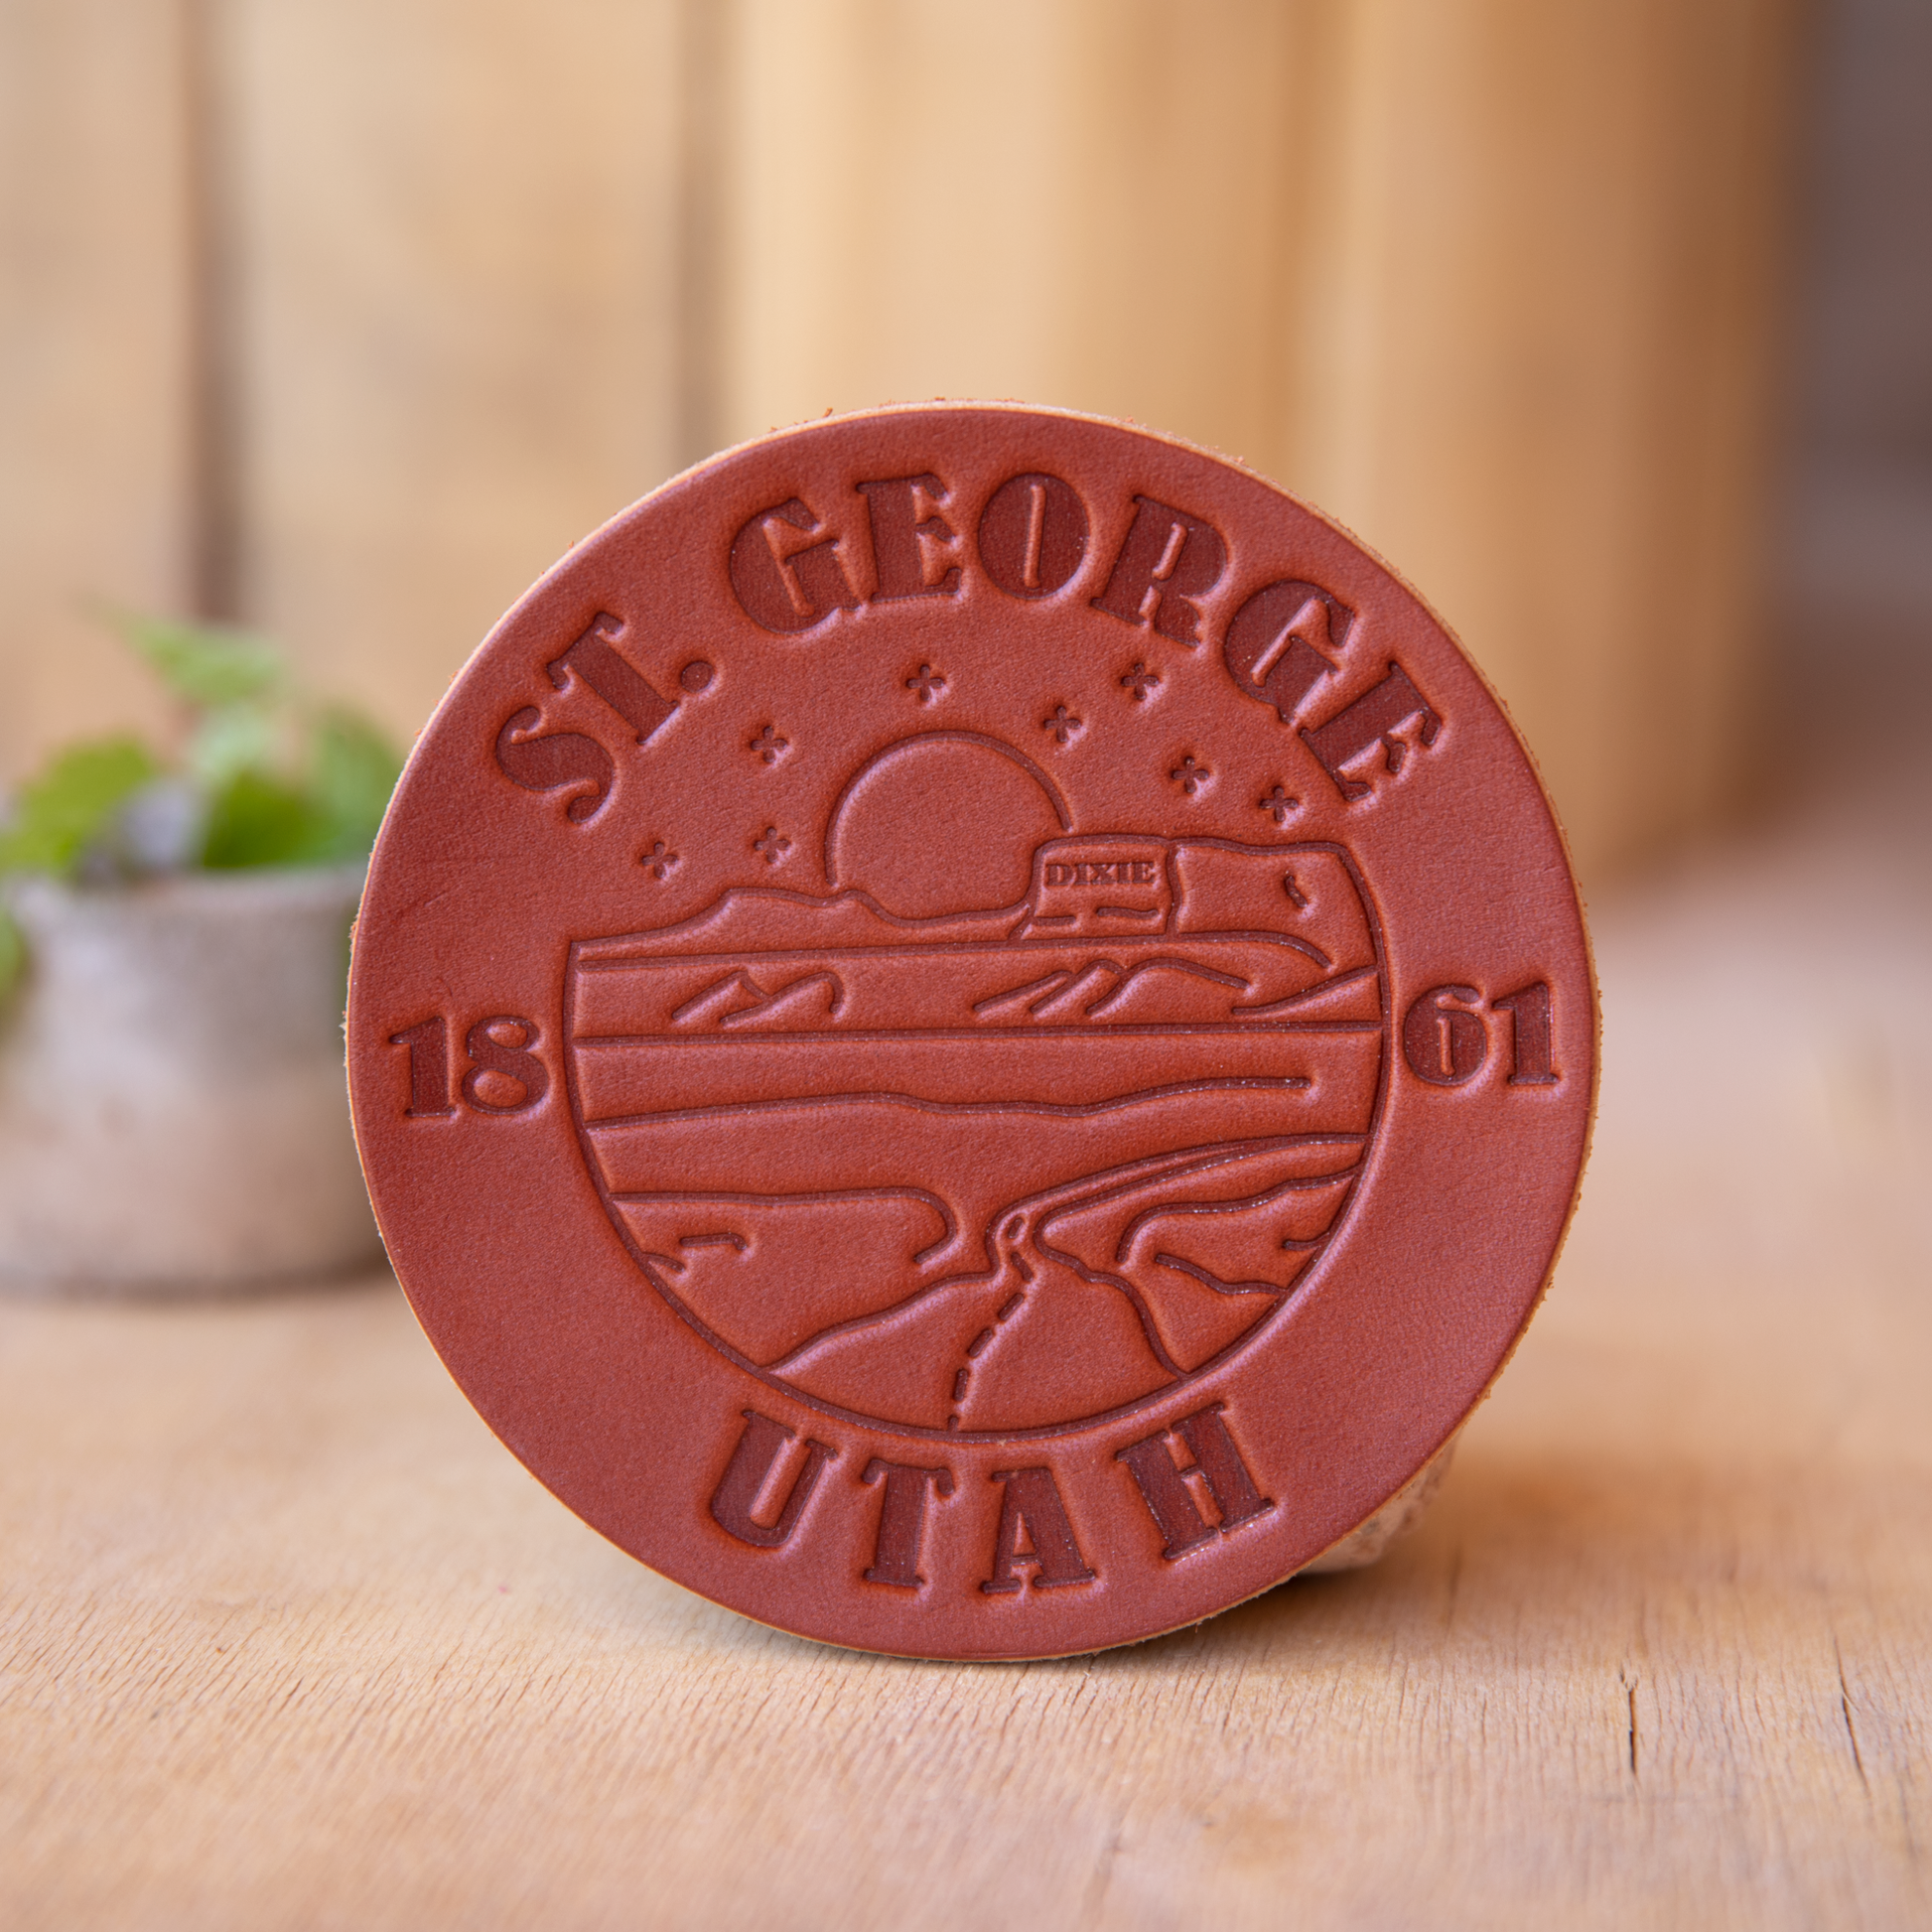 St. George Leather Coasters - Lazy 3 Leather Company